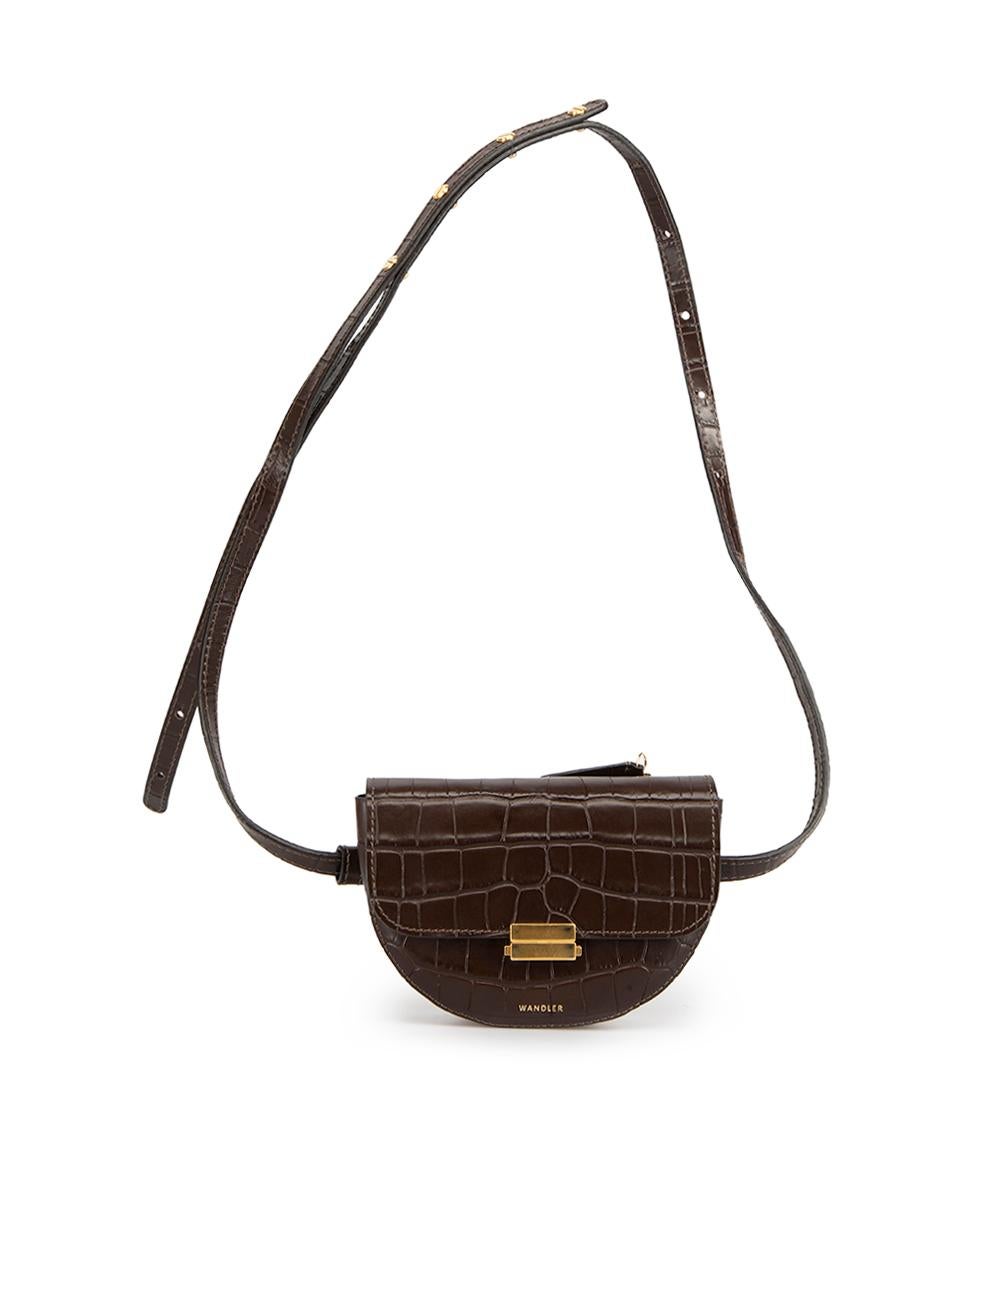 Wandler Brown Leather Croc Embossed Belt Bag In Excellent Condition For Sale In London, GB